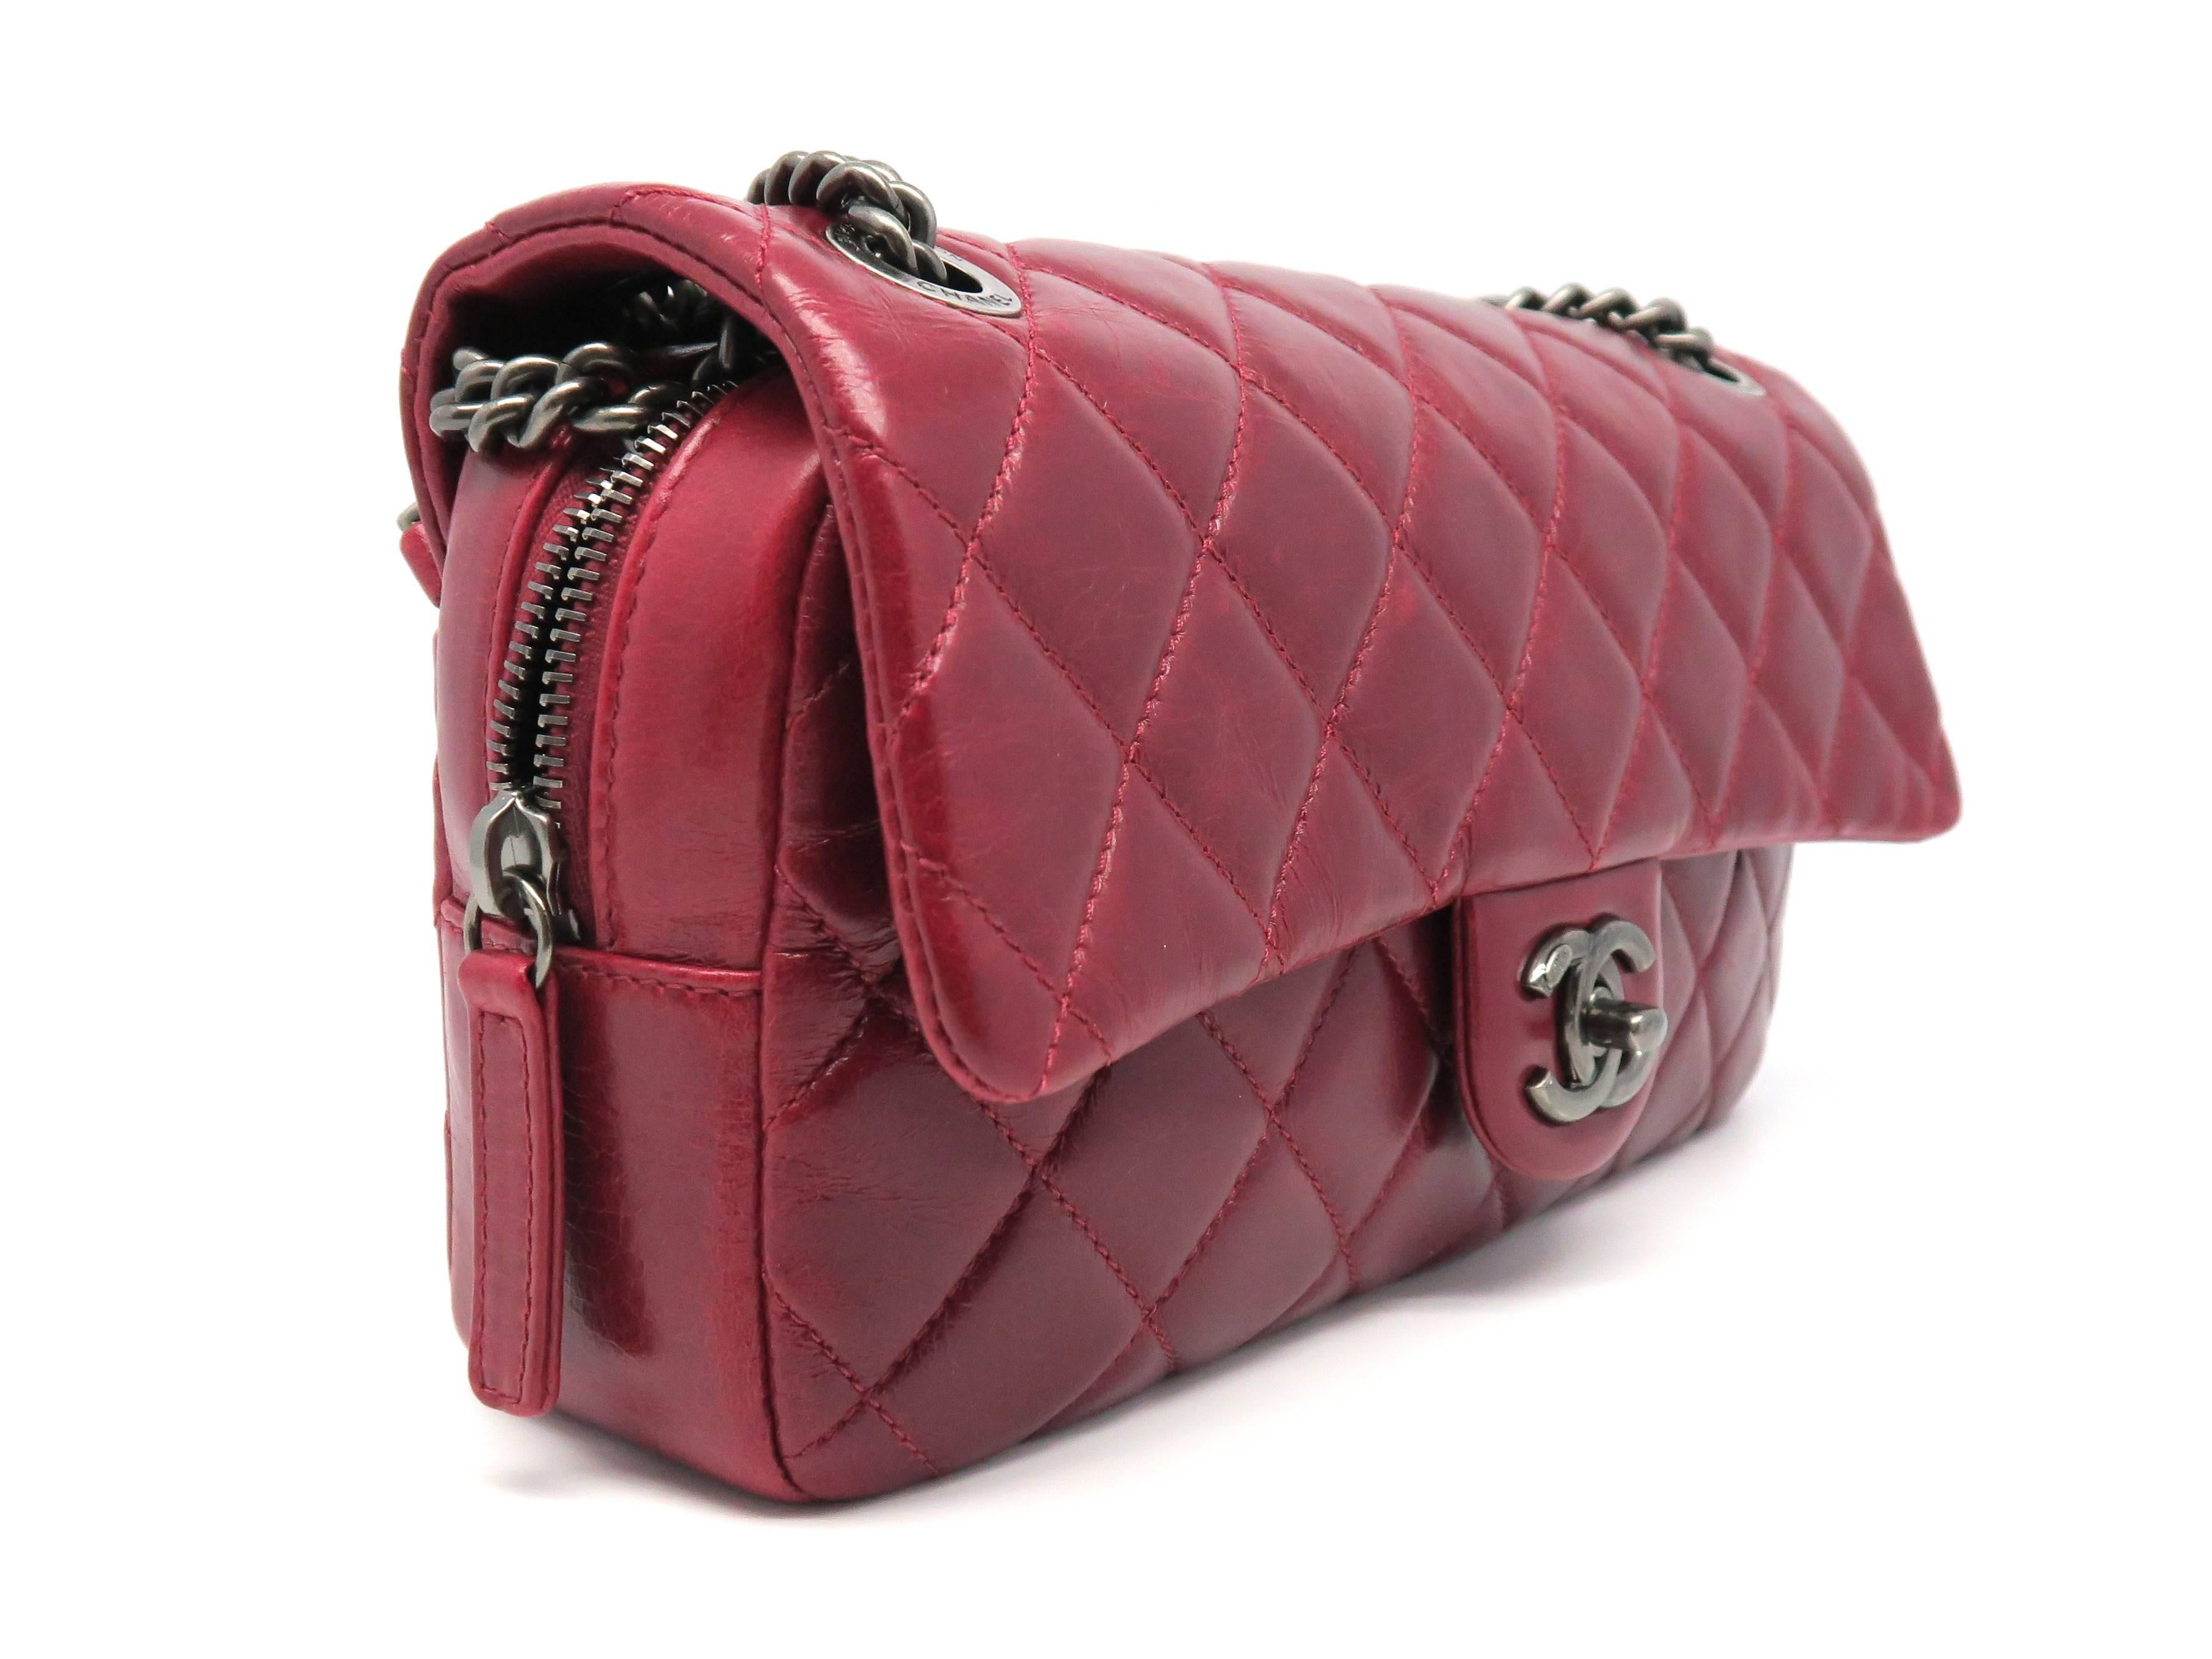 Color: Red 

Material: Aged Calf Leather 

Condition: Rank S 
Overall: Almost New
Surface: Good
Corners: Good
Edges: Good
Handles/Straps: Good
Hardware: Good

Dimension: W25.5 × H14 × D5.5cm（W10.0" × H5.5" × D2.1"）
Shoulder